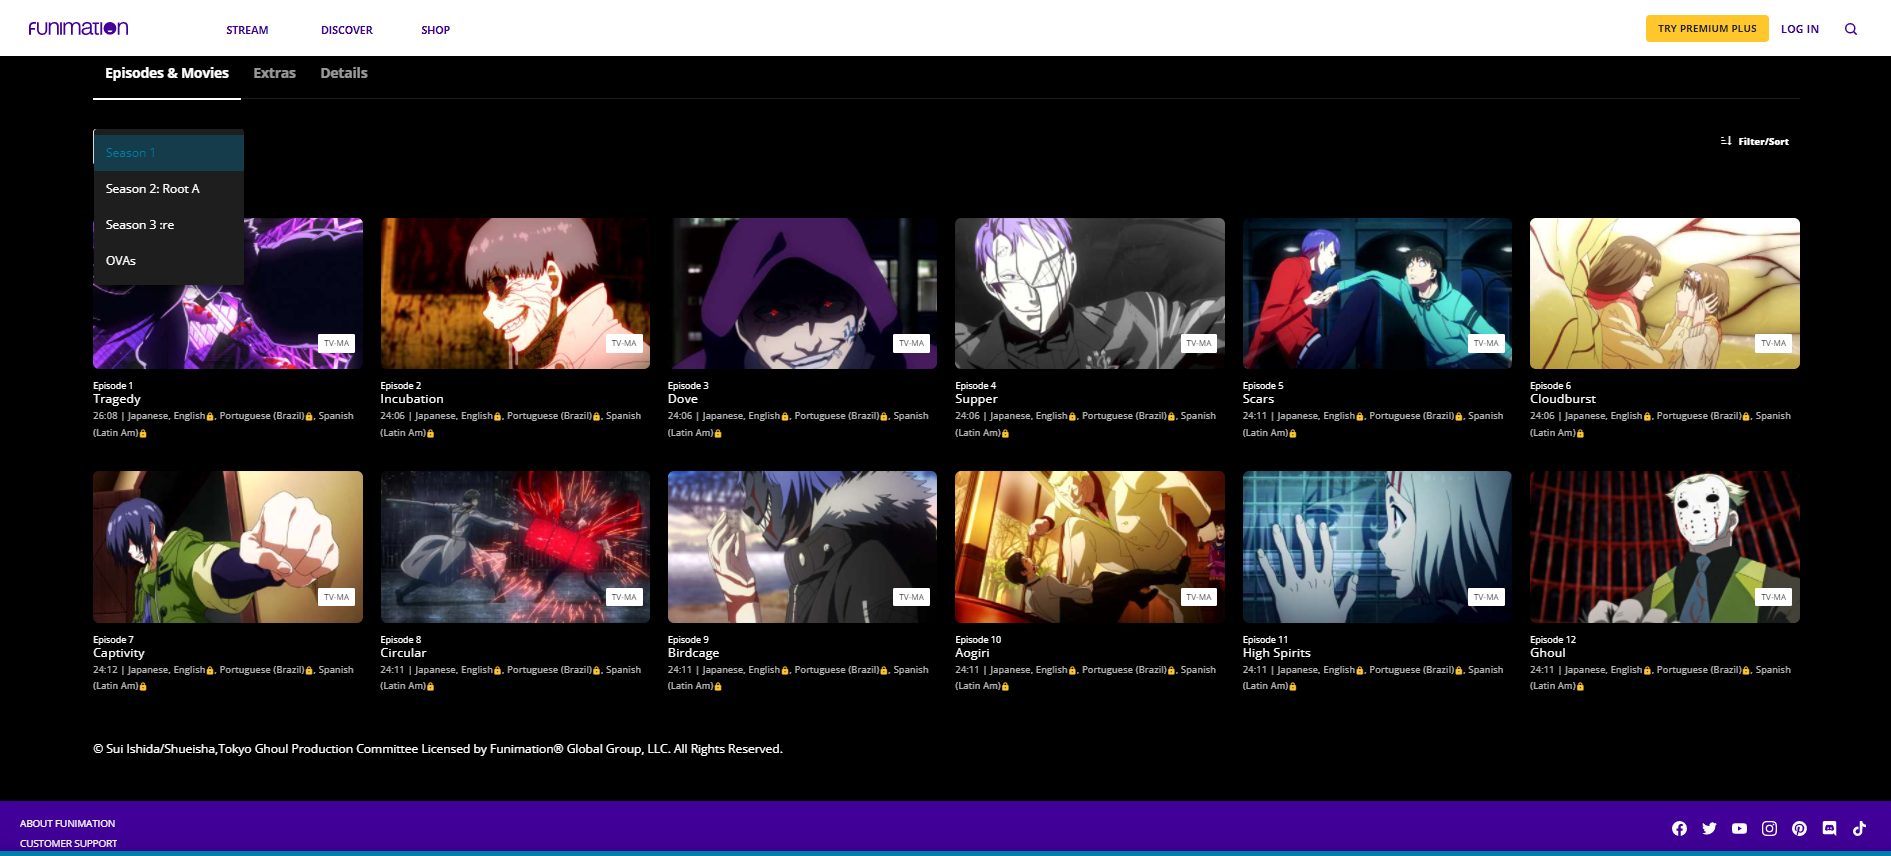 How to watch Tokyo Ghoul on Funimation Free